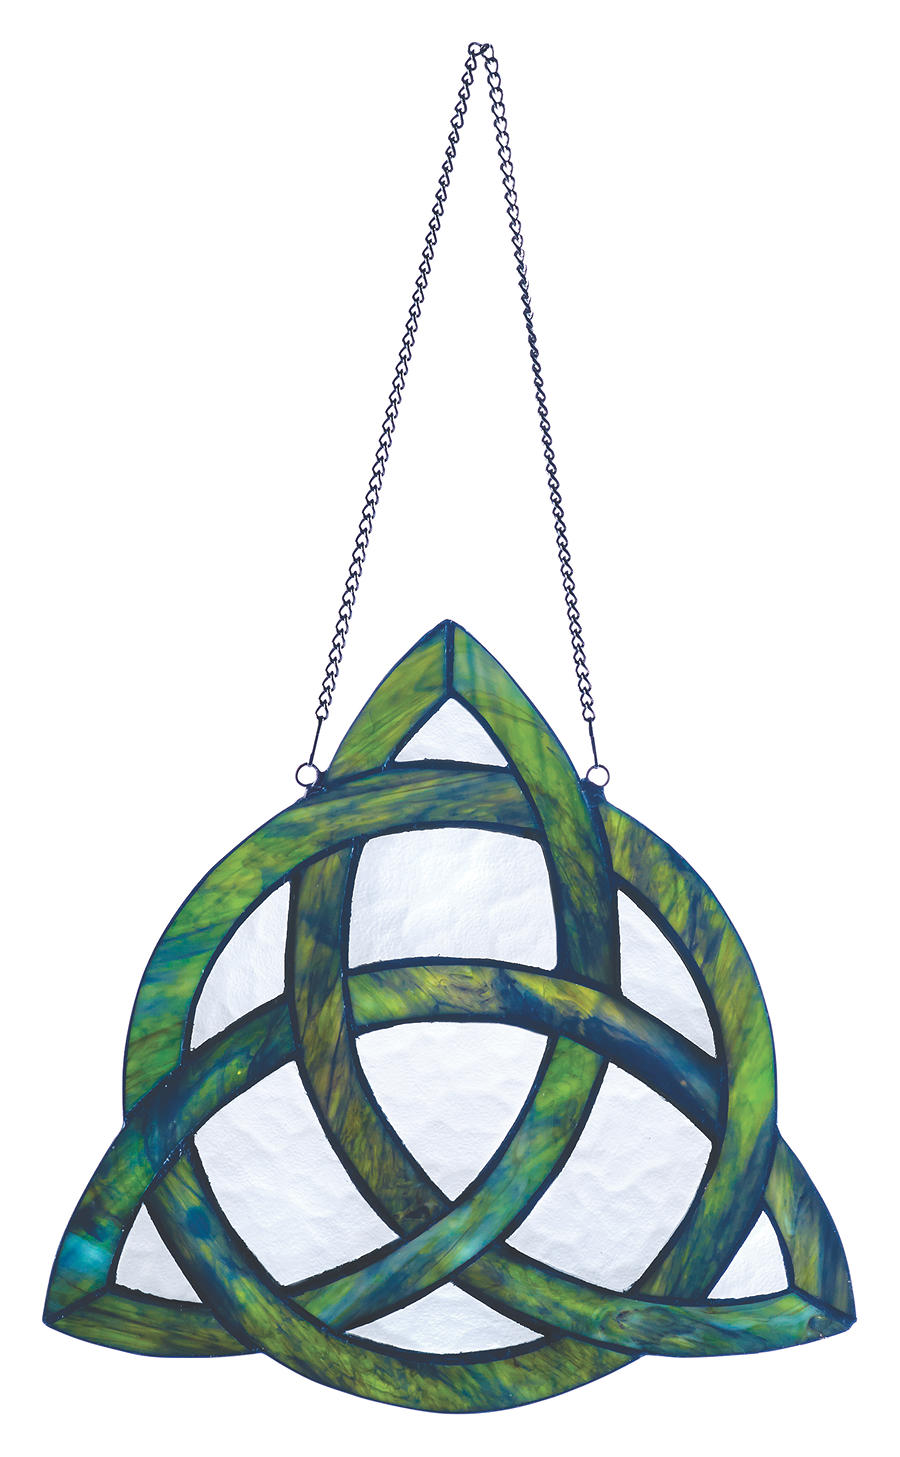 Product image for Trinity Knot Stained Glass Hanging Window Panel